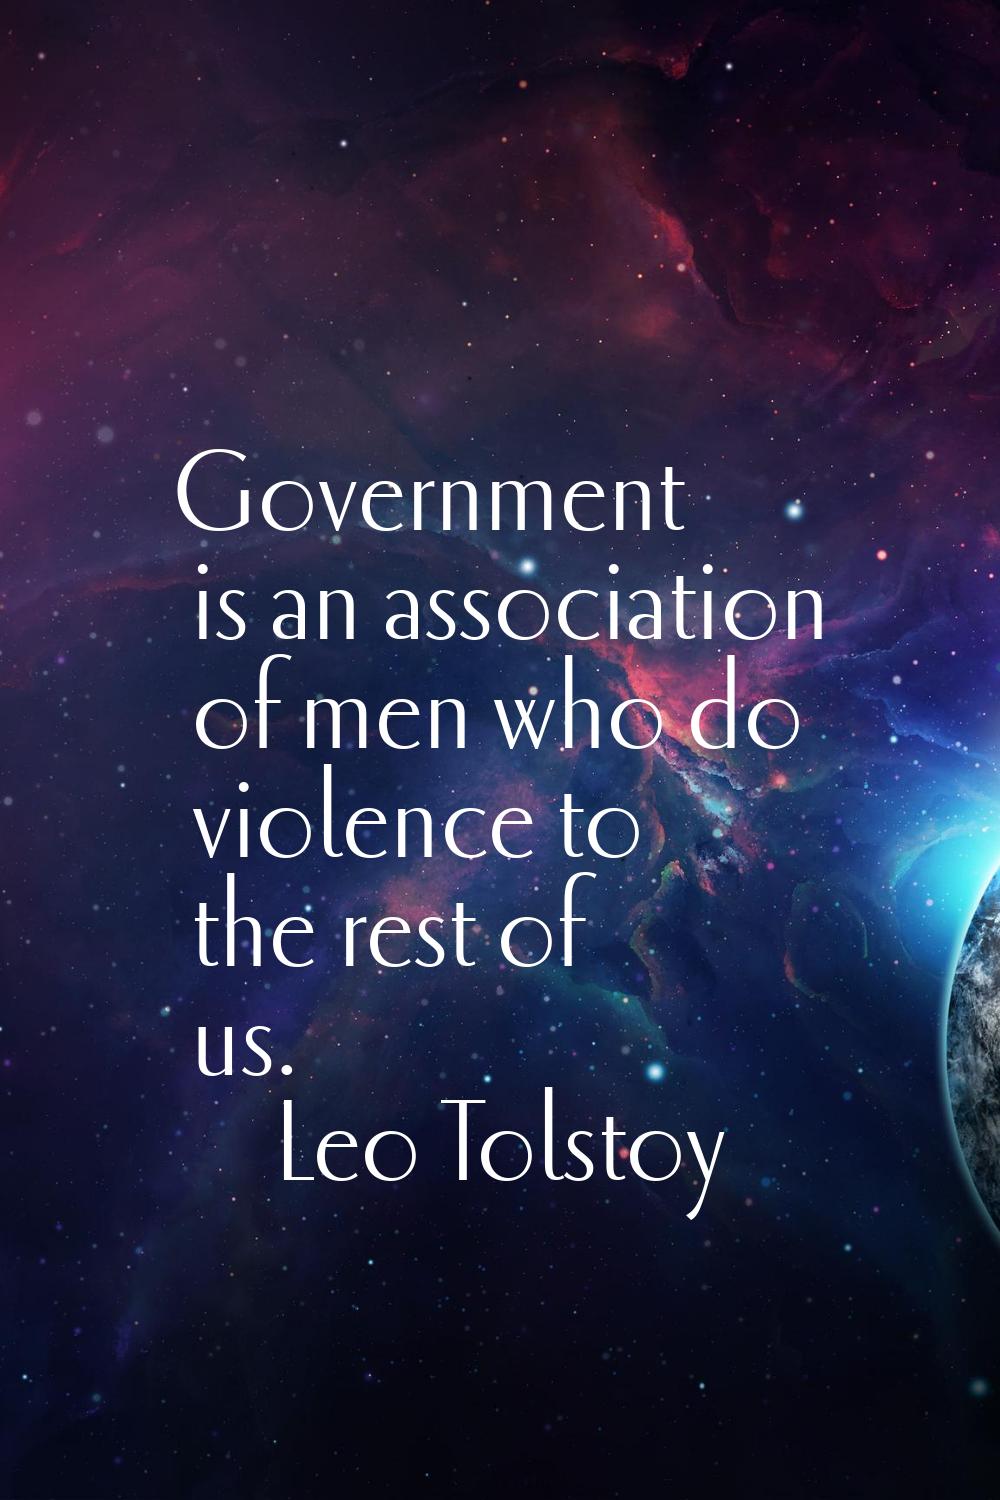 Government is an association of men who do violence to the rest of us.